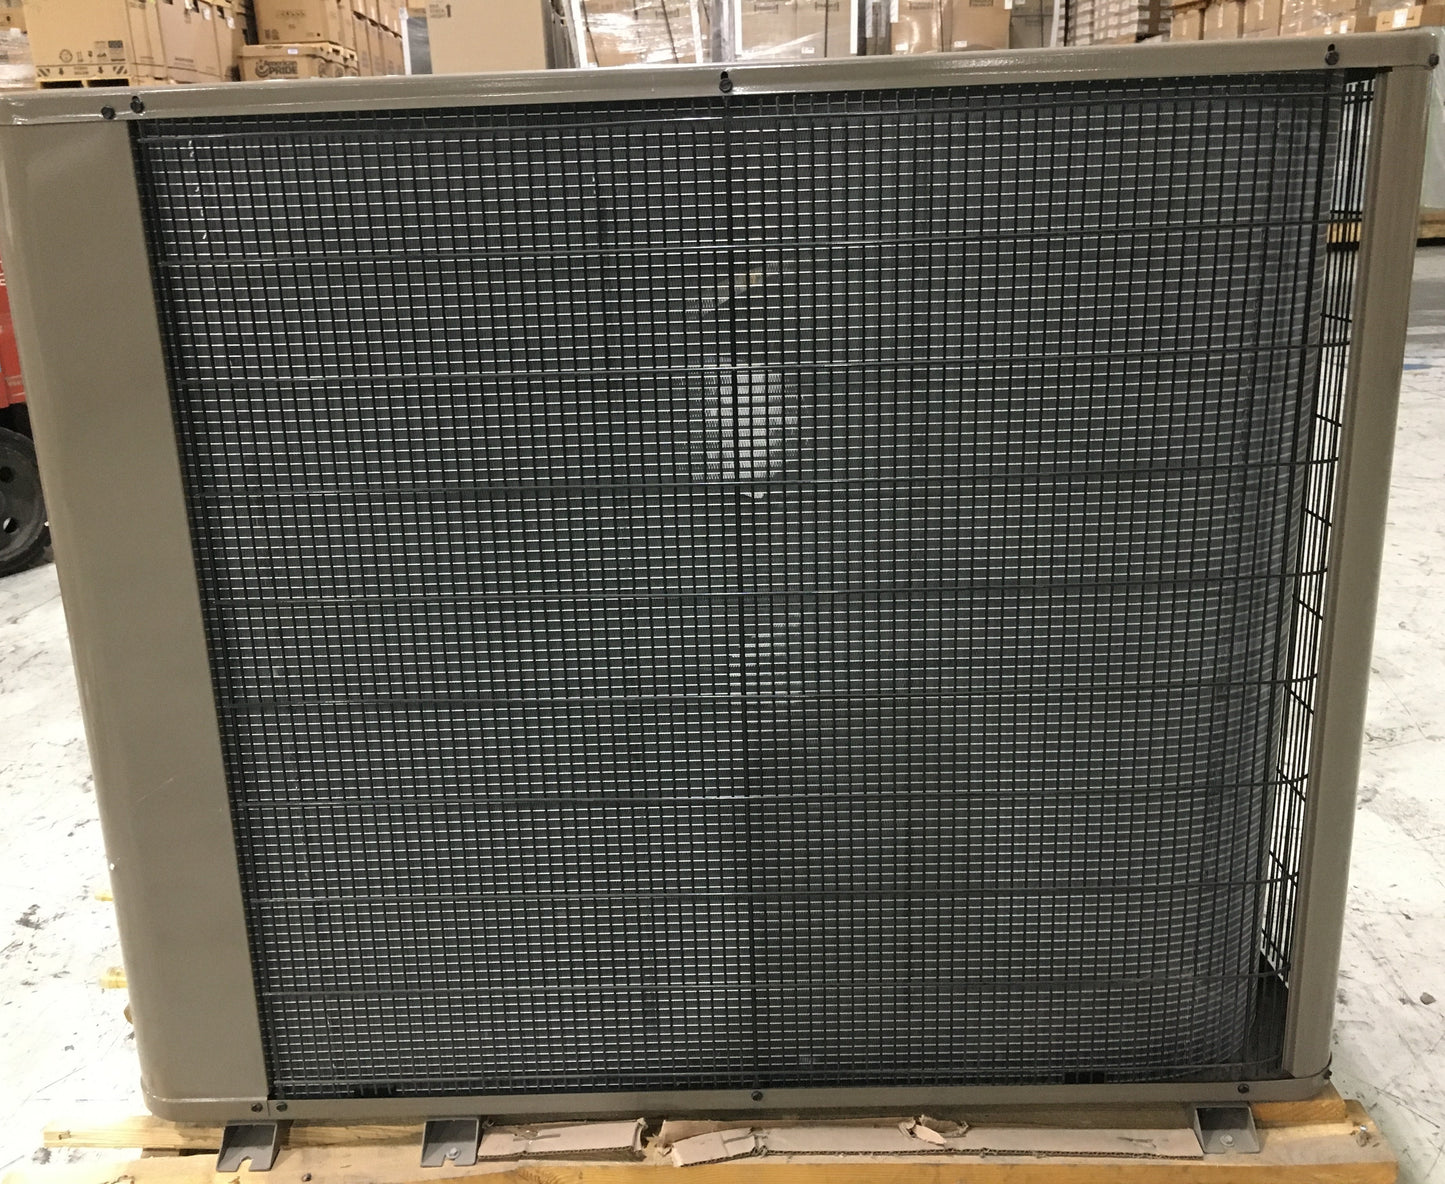 2 TON HORIZONTAL SPLIT-SYSTEM AIR CONDITIONER 208-230/60/1 R410A 13 SEER